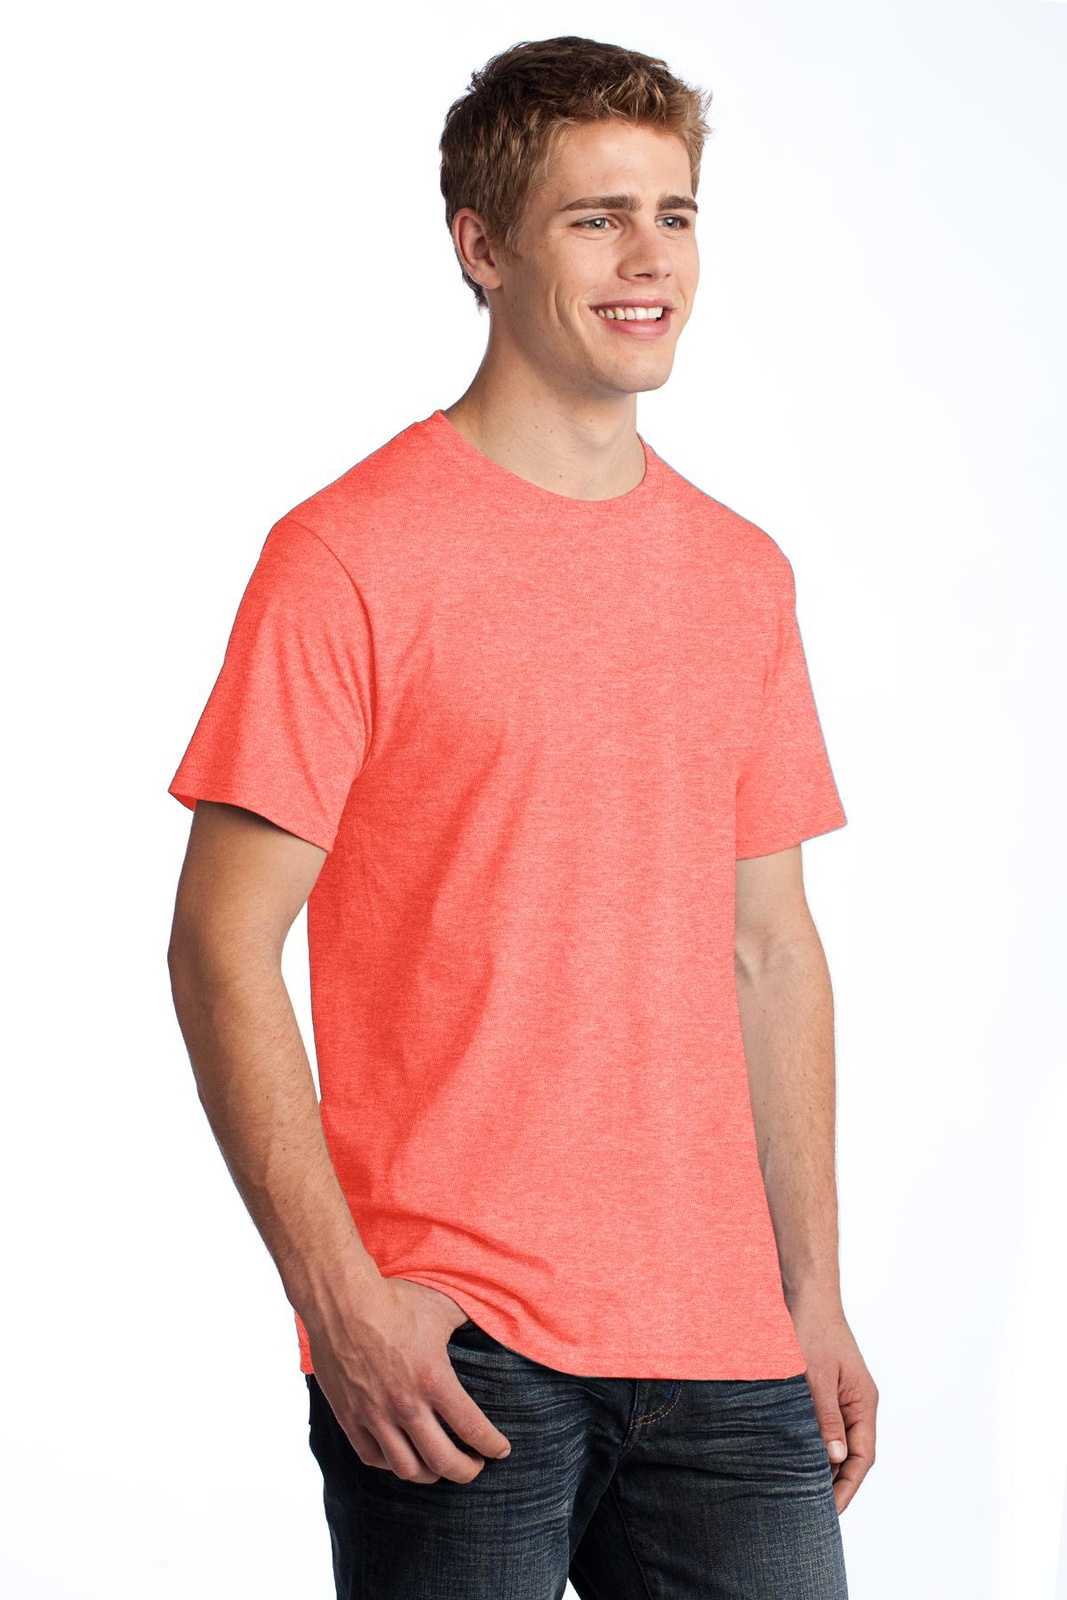 Fruit of the Loom 3930 HD Cotton 100% Cotton T-Shirt - Retro Heather Coral - HIT a Double